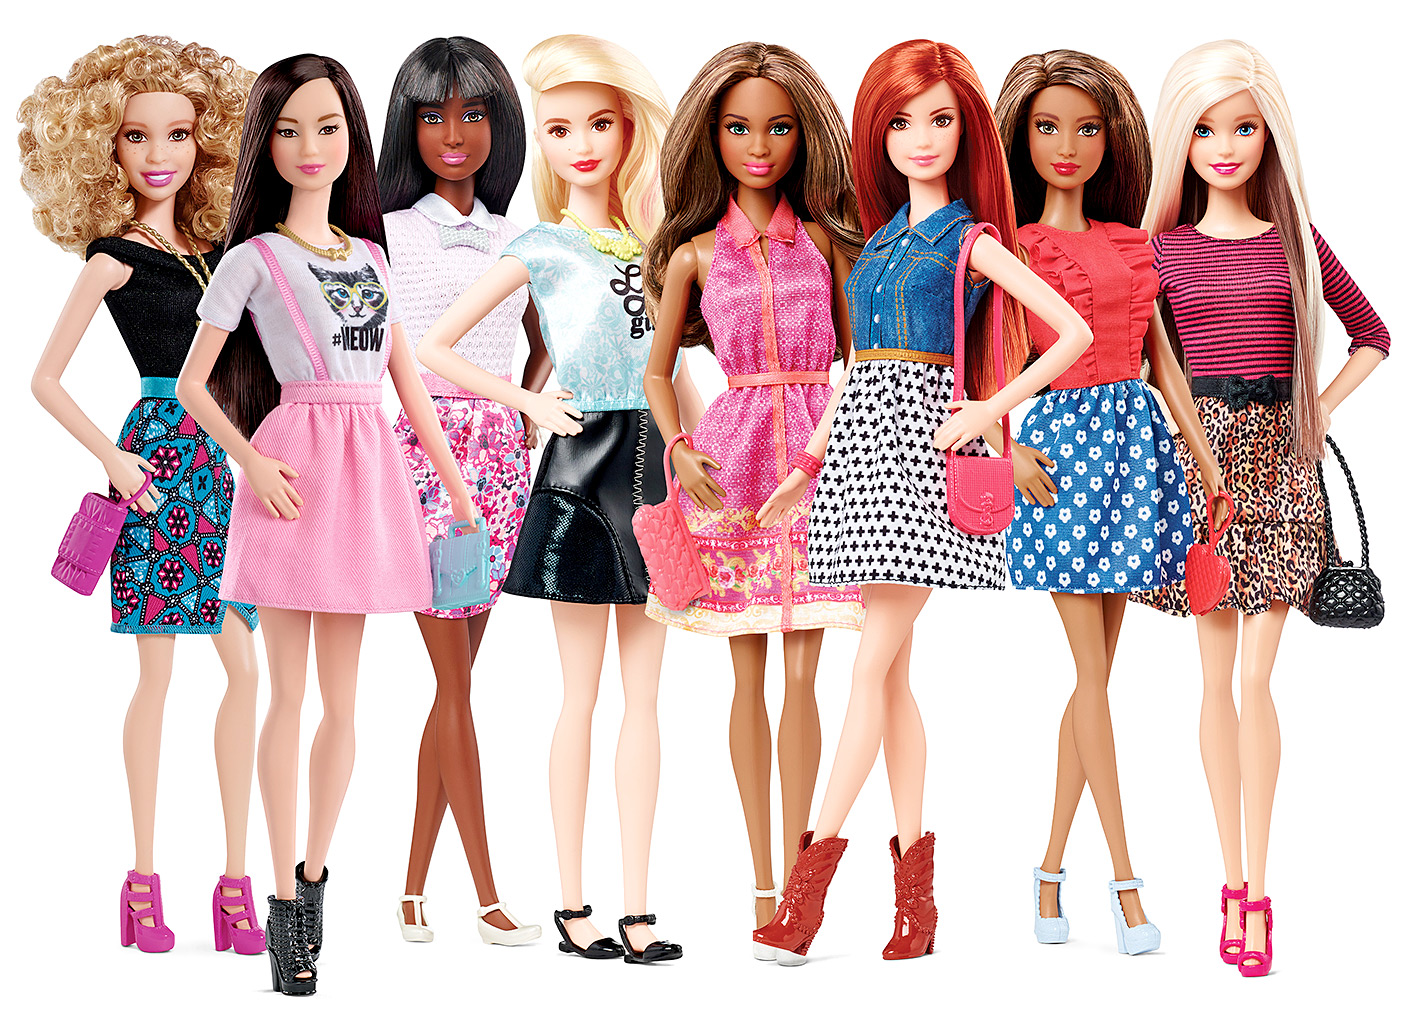 mattel-s-barbie-fashionistas-12-dolls-that-look-nothing-like-your